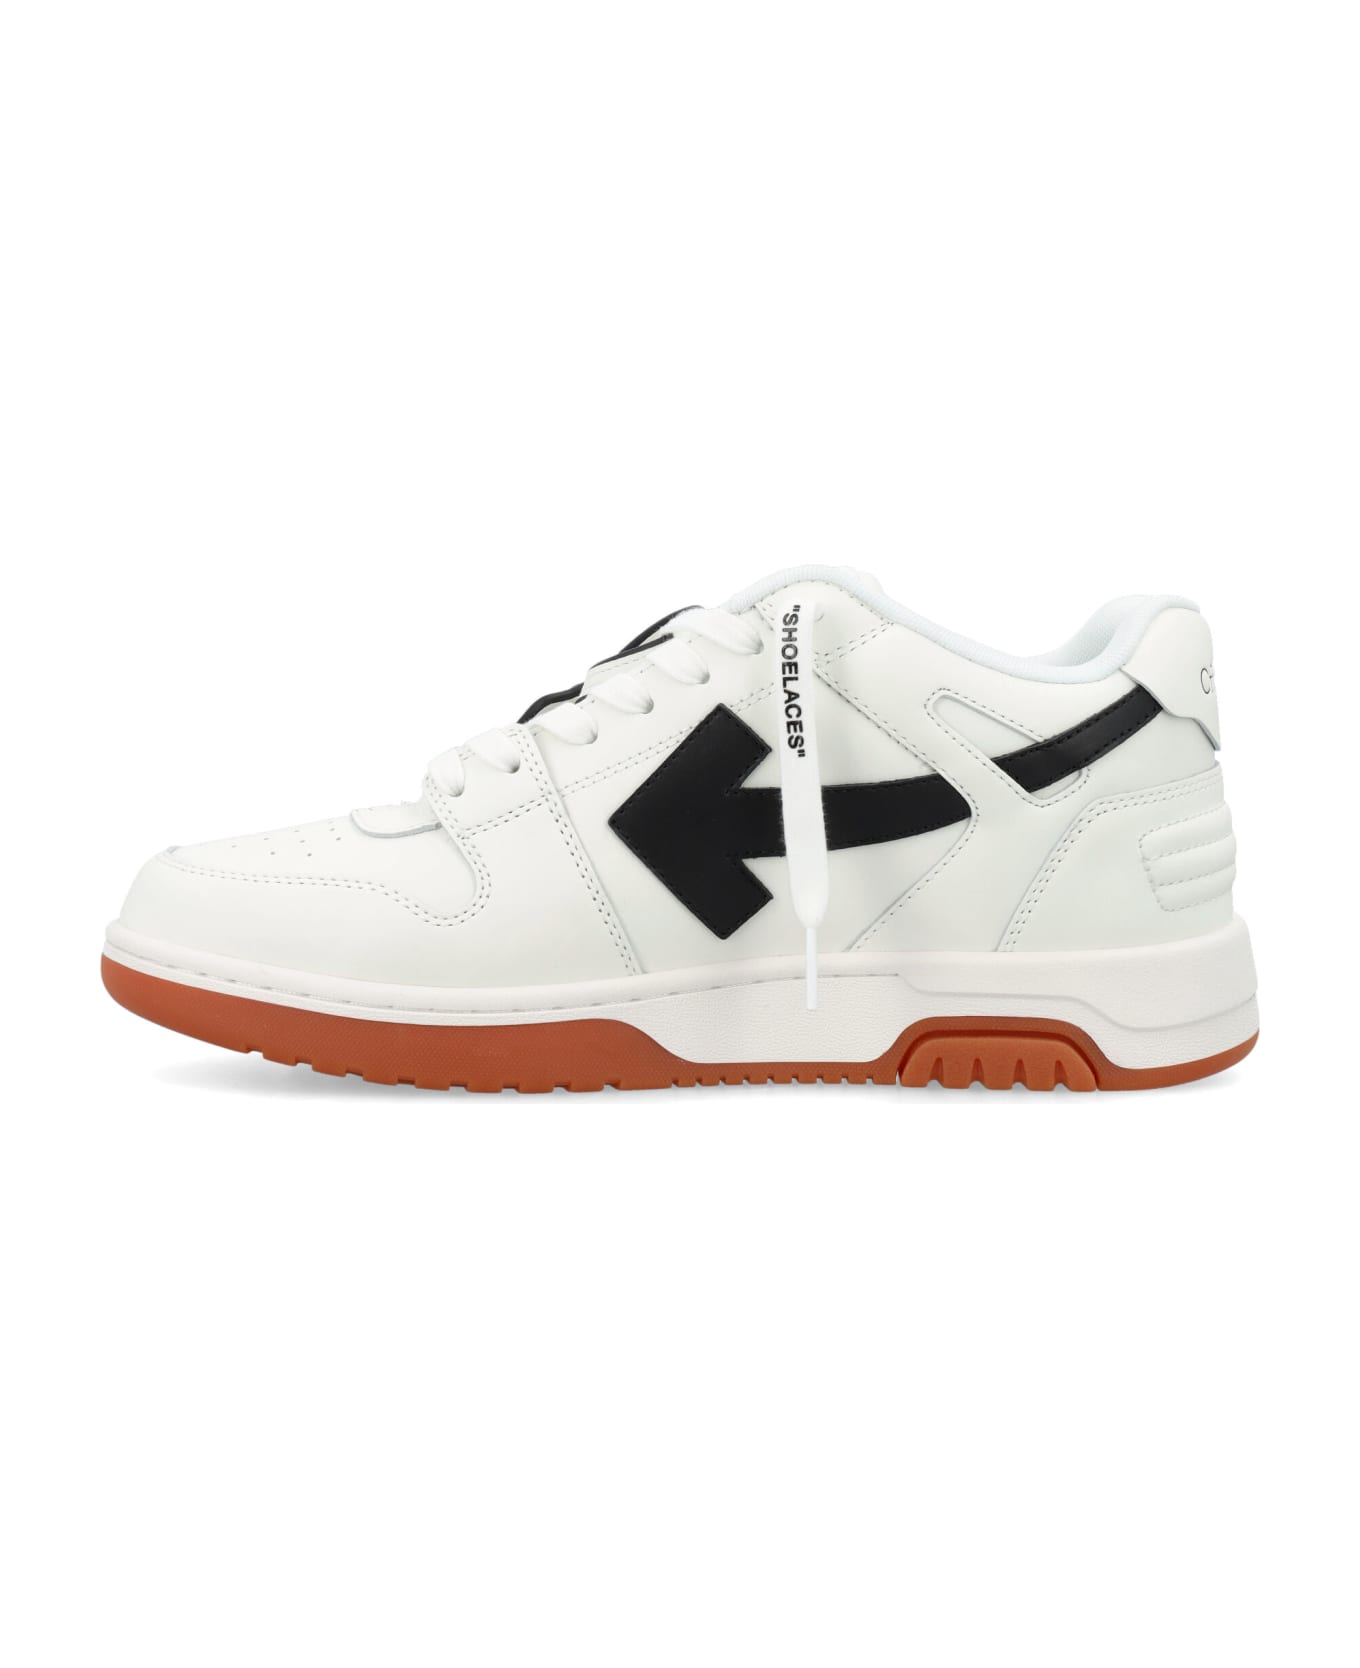 Off-White Out Of Office Sneakers - WHITE BLACK スニーカー